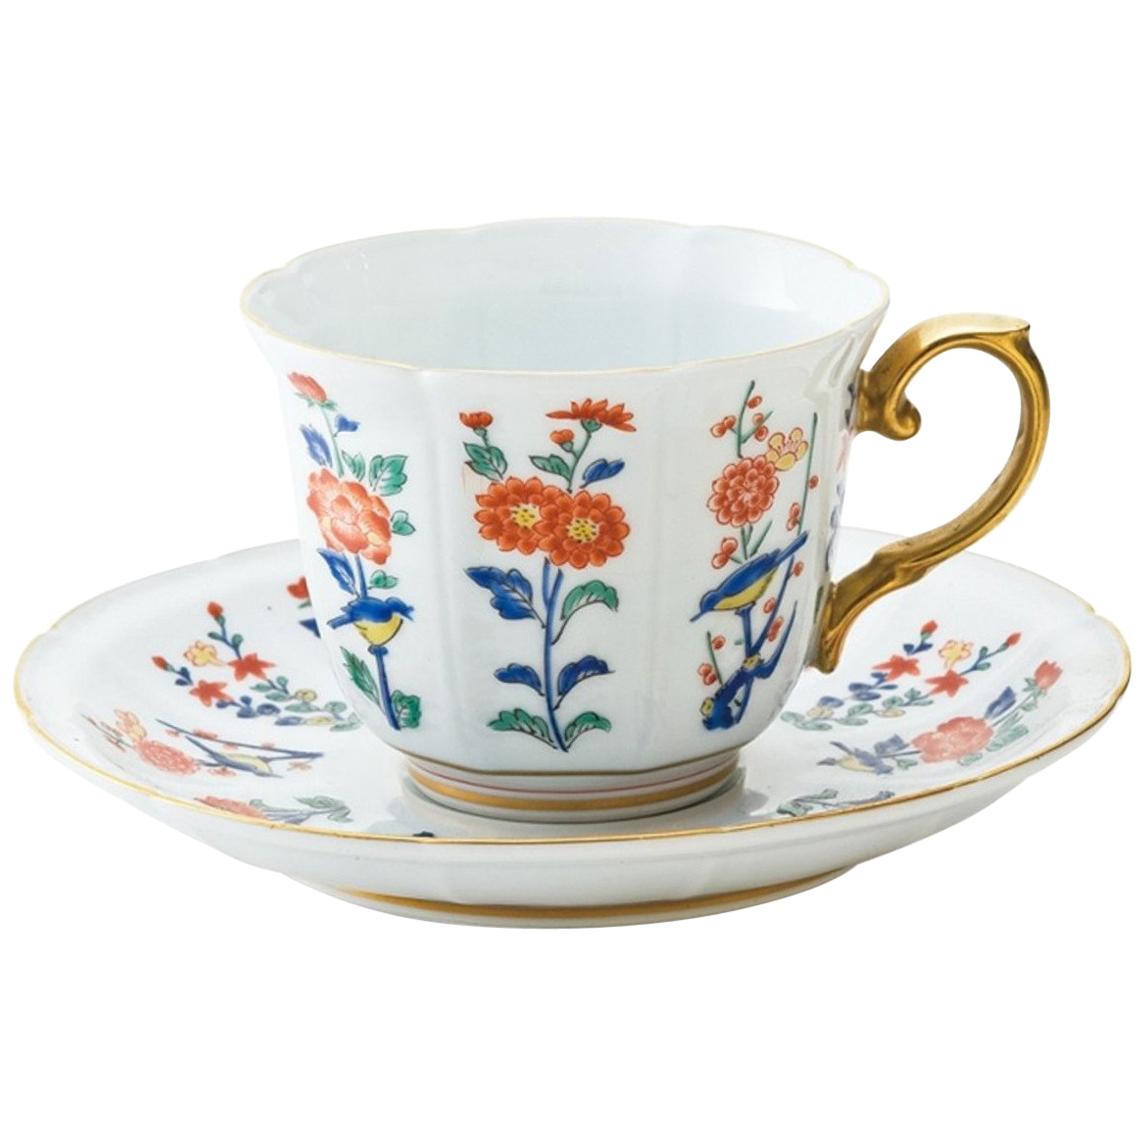 Set of Contemporary Gilded Blue Red Porcelain Cup and Saucer